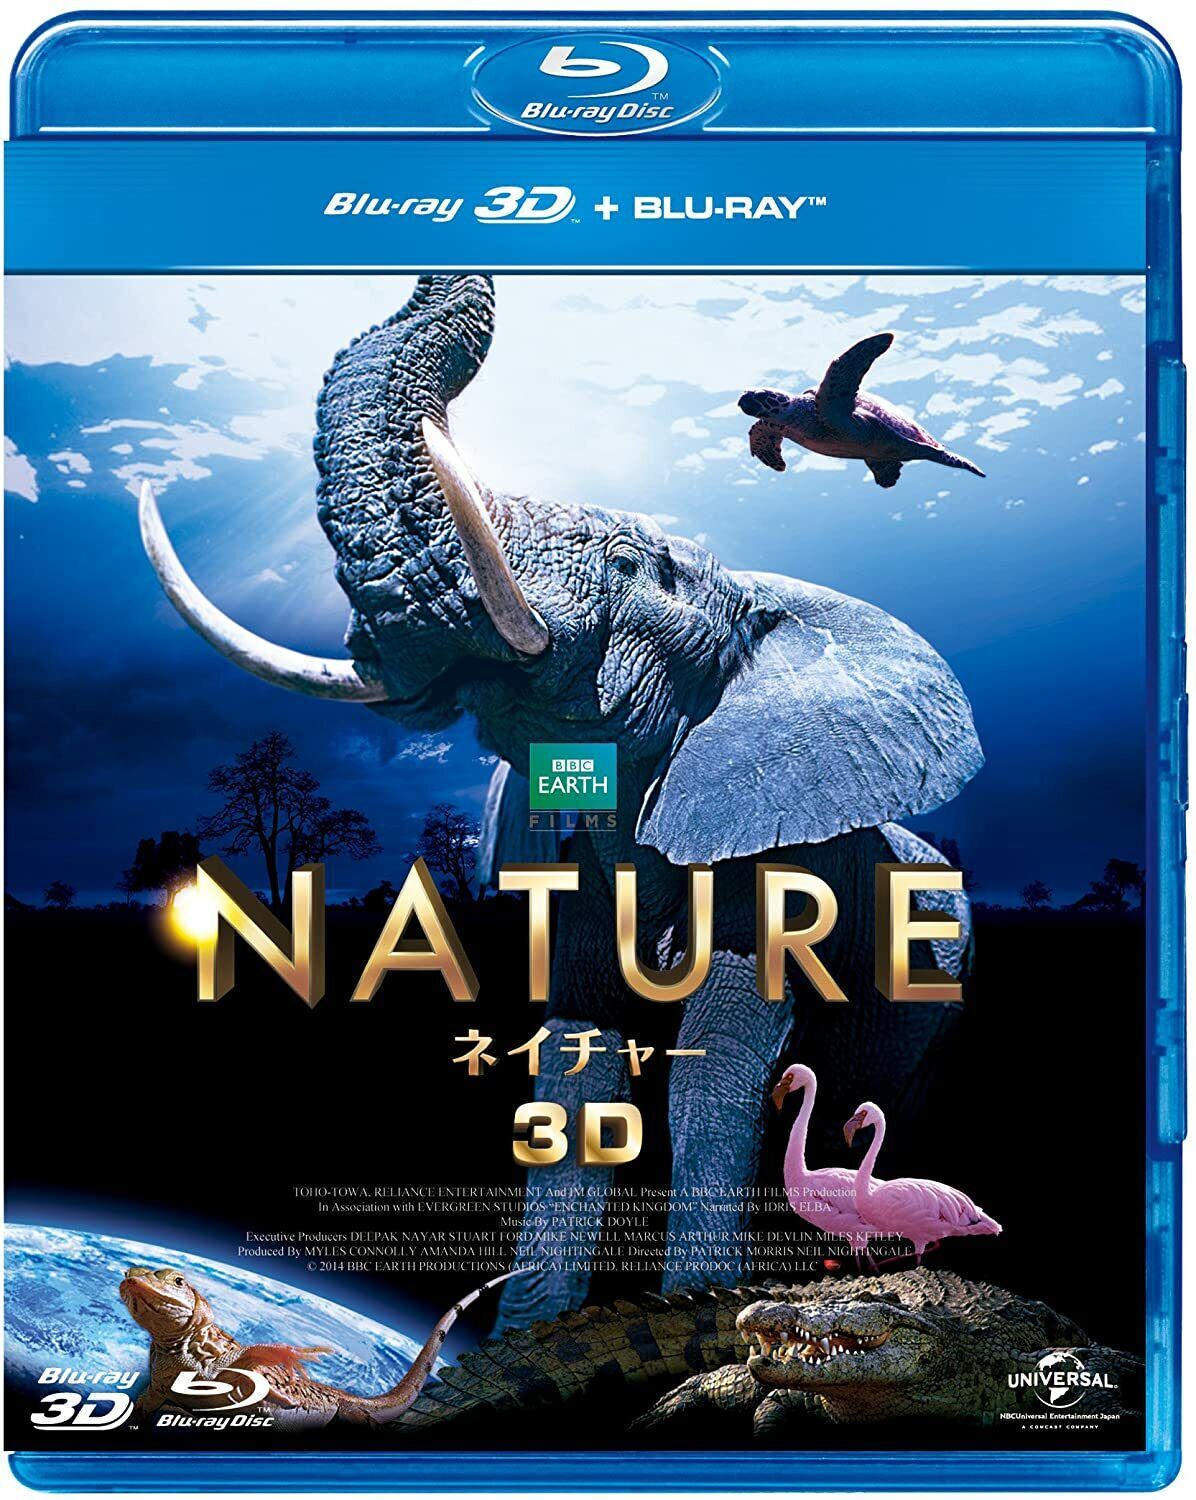 Nature 3D & 2D Blu-ray Set Patrick Morris 4K Dolby Atmos GNXF1803 from Japan